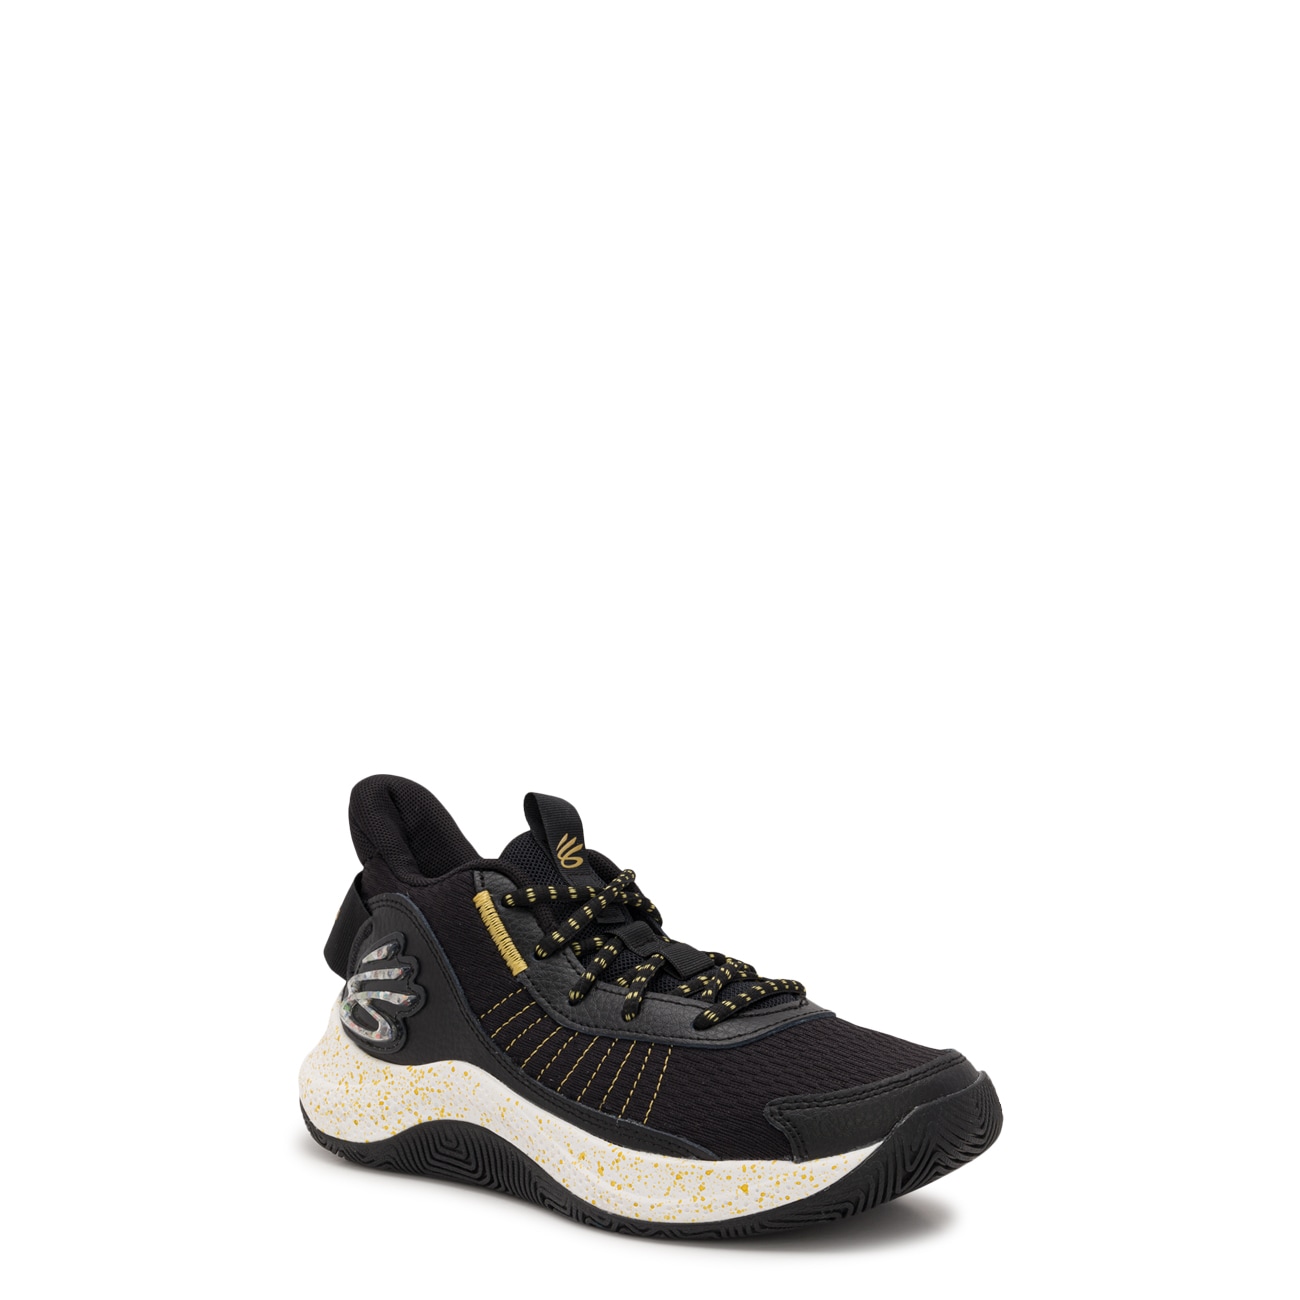 Youth Boys' Curry 3Z7 Basketball Shoe